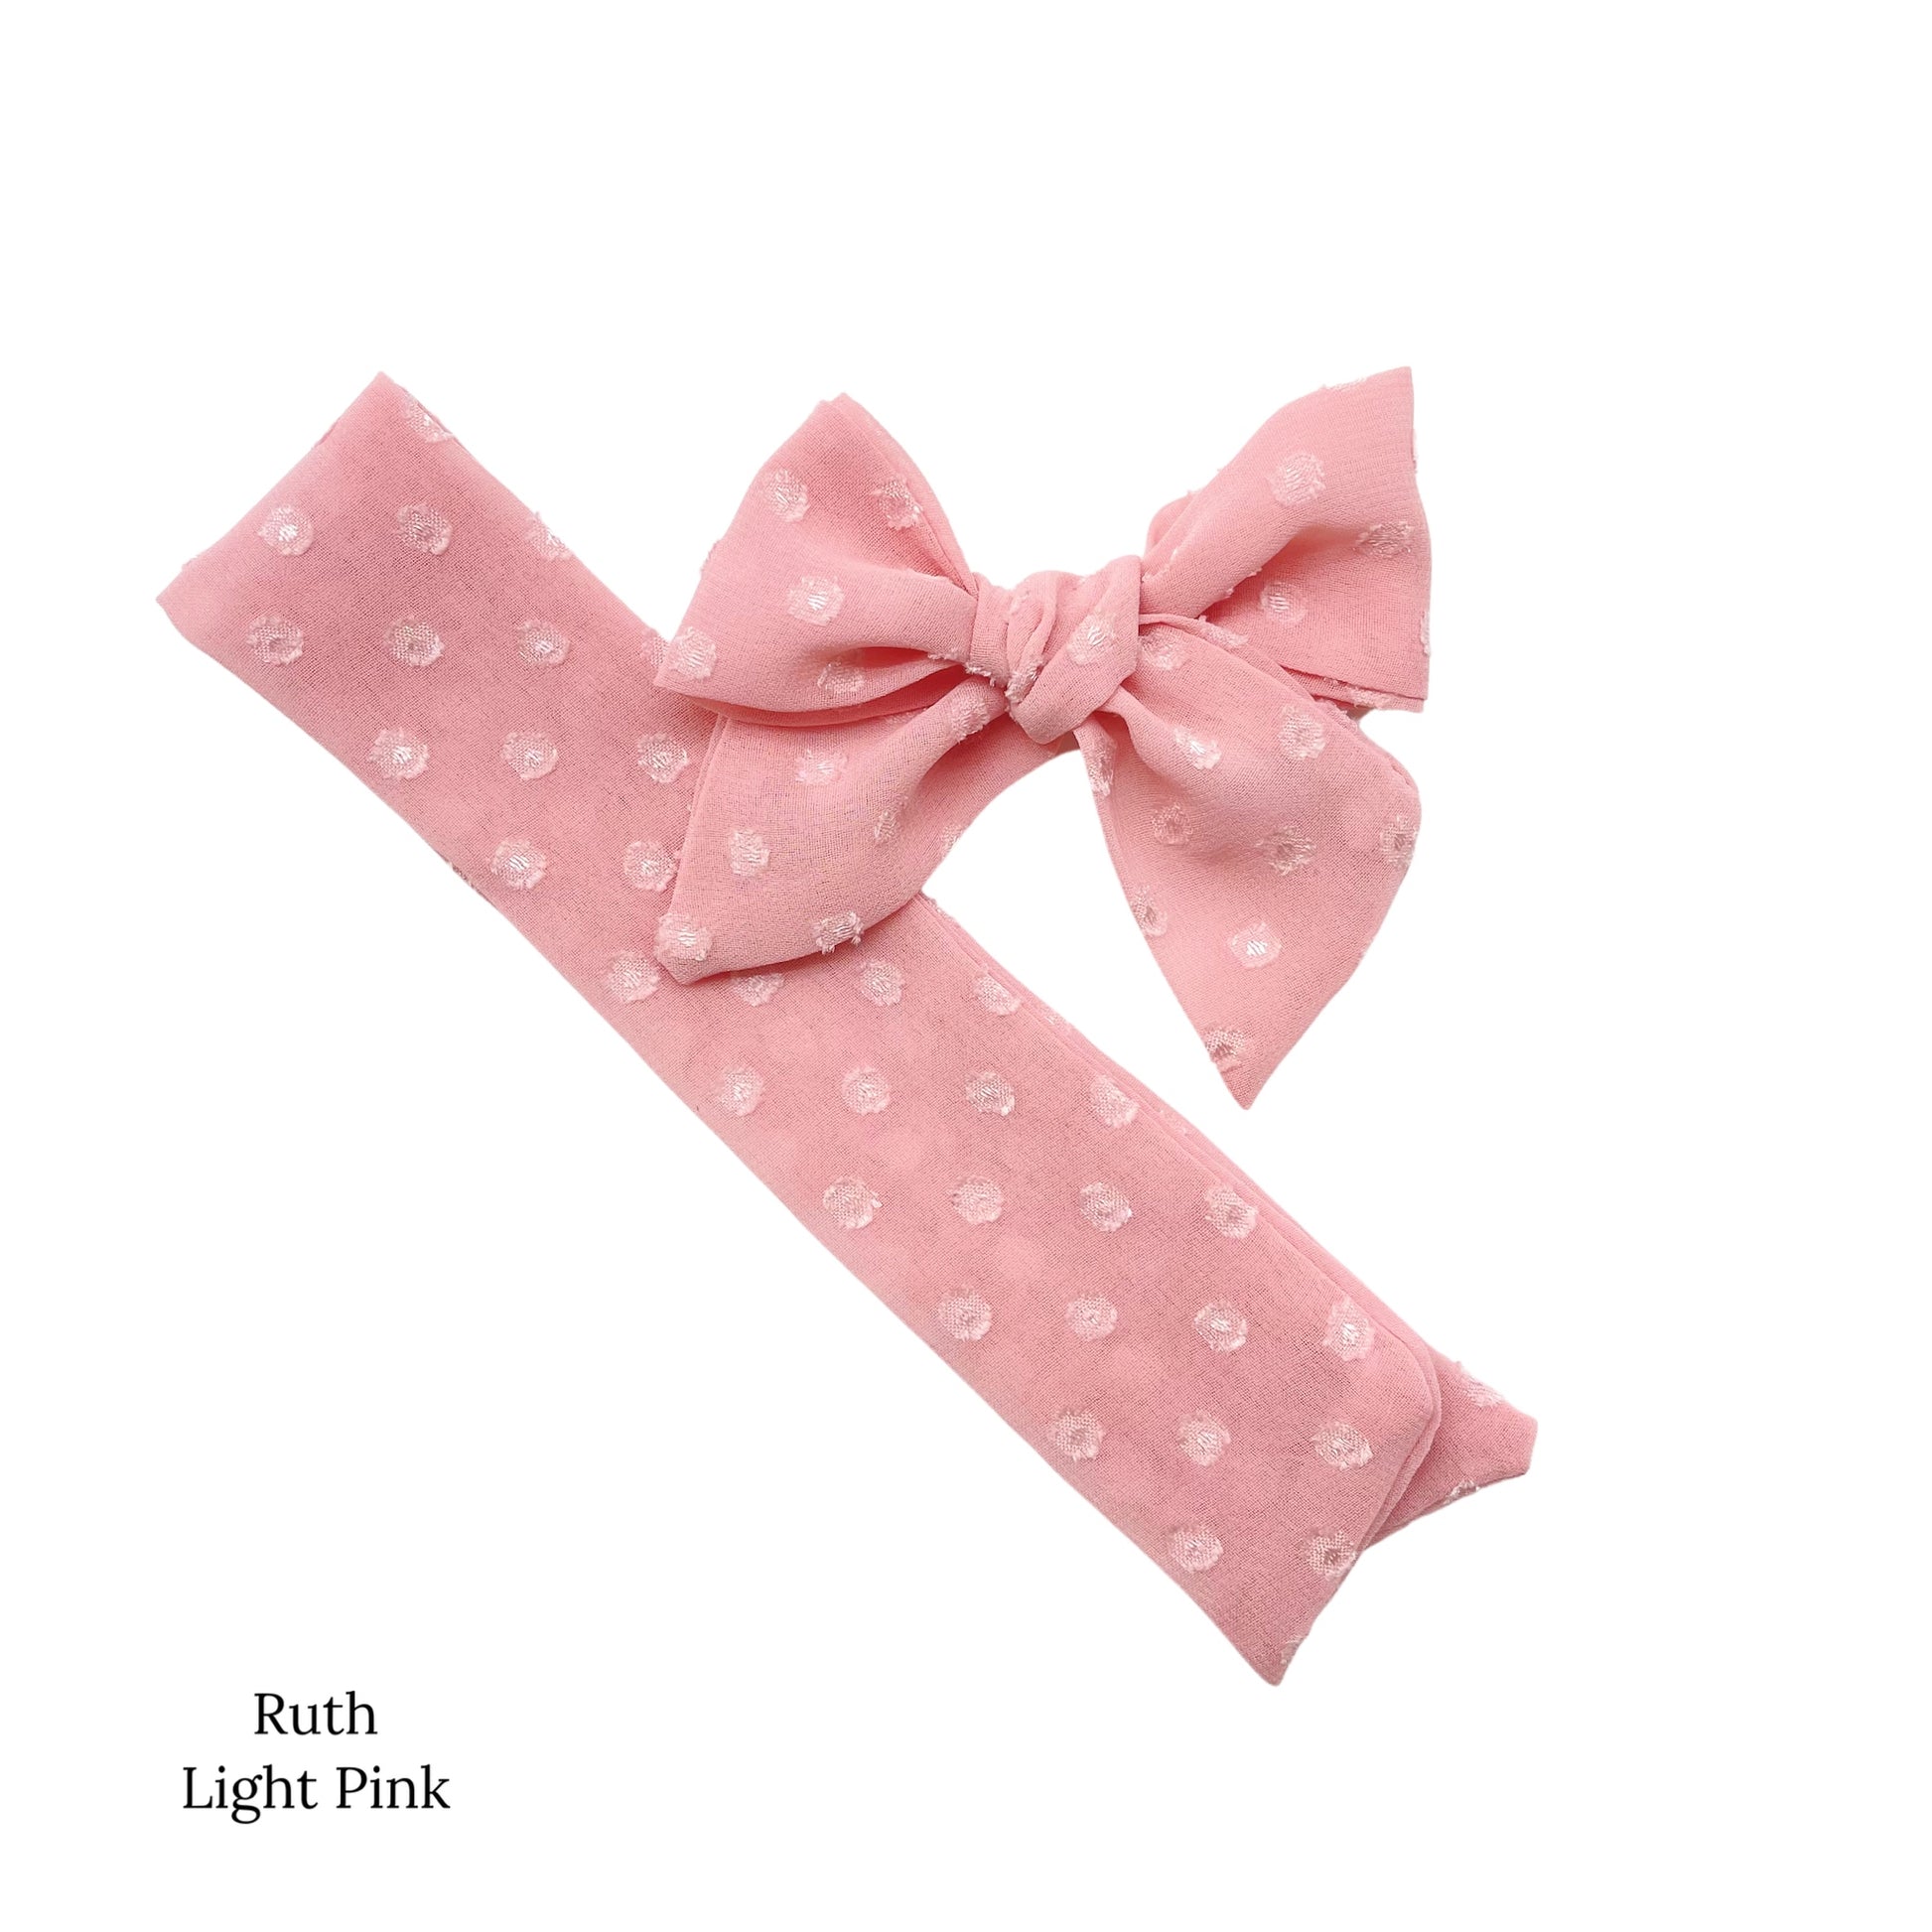 Spring frayed dot fabric bow strips. Light pink colored sailor style bow strip.